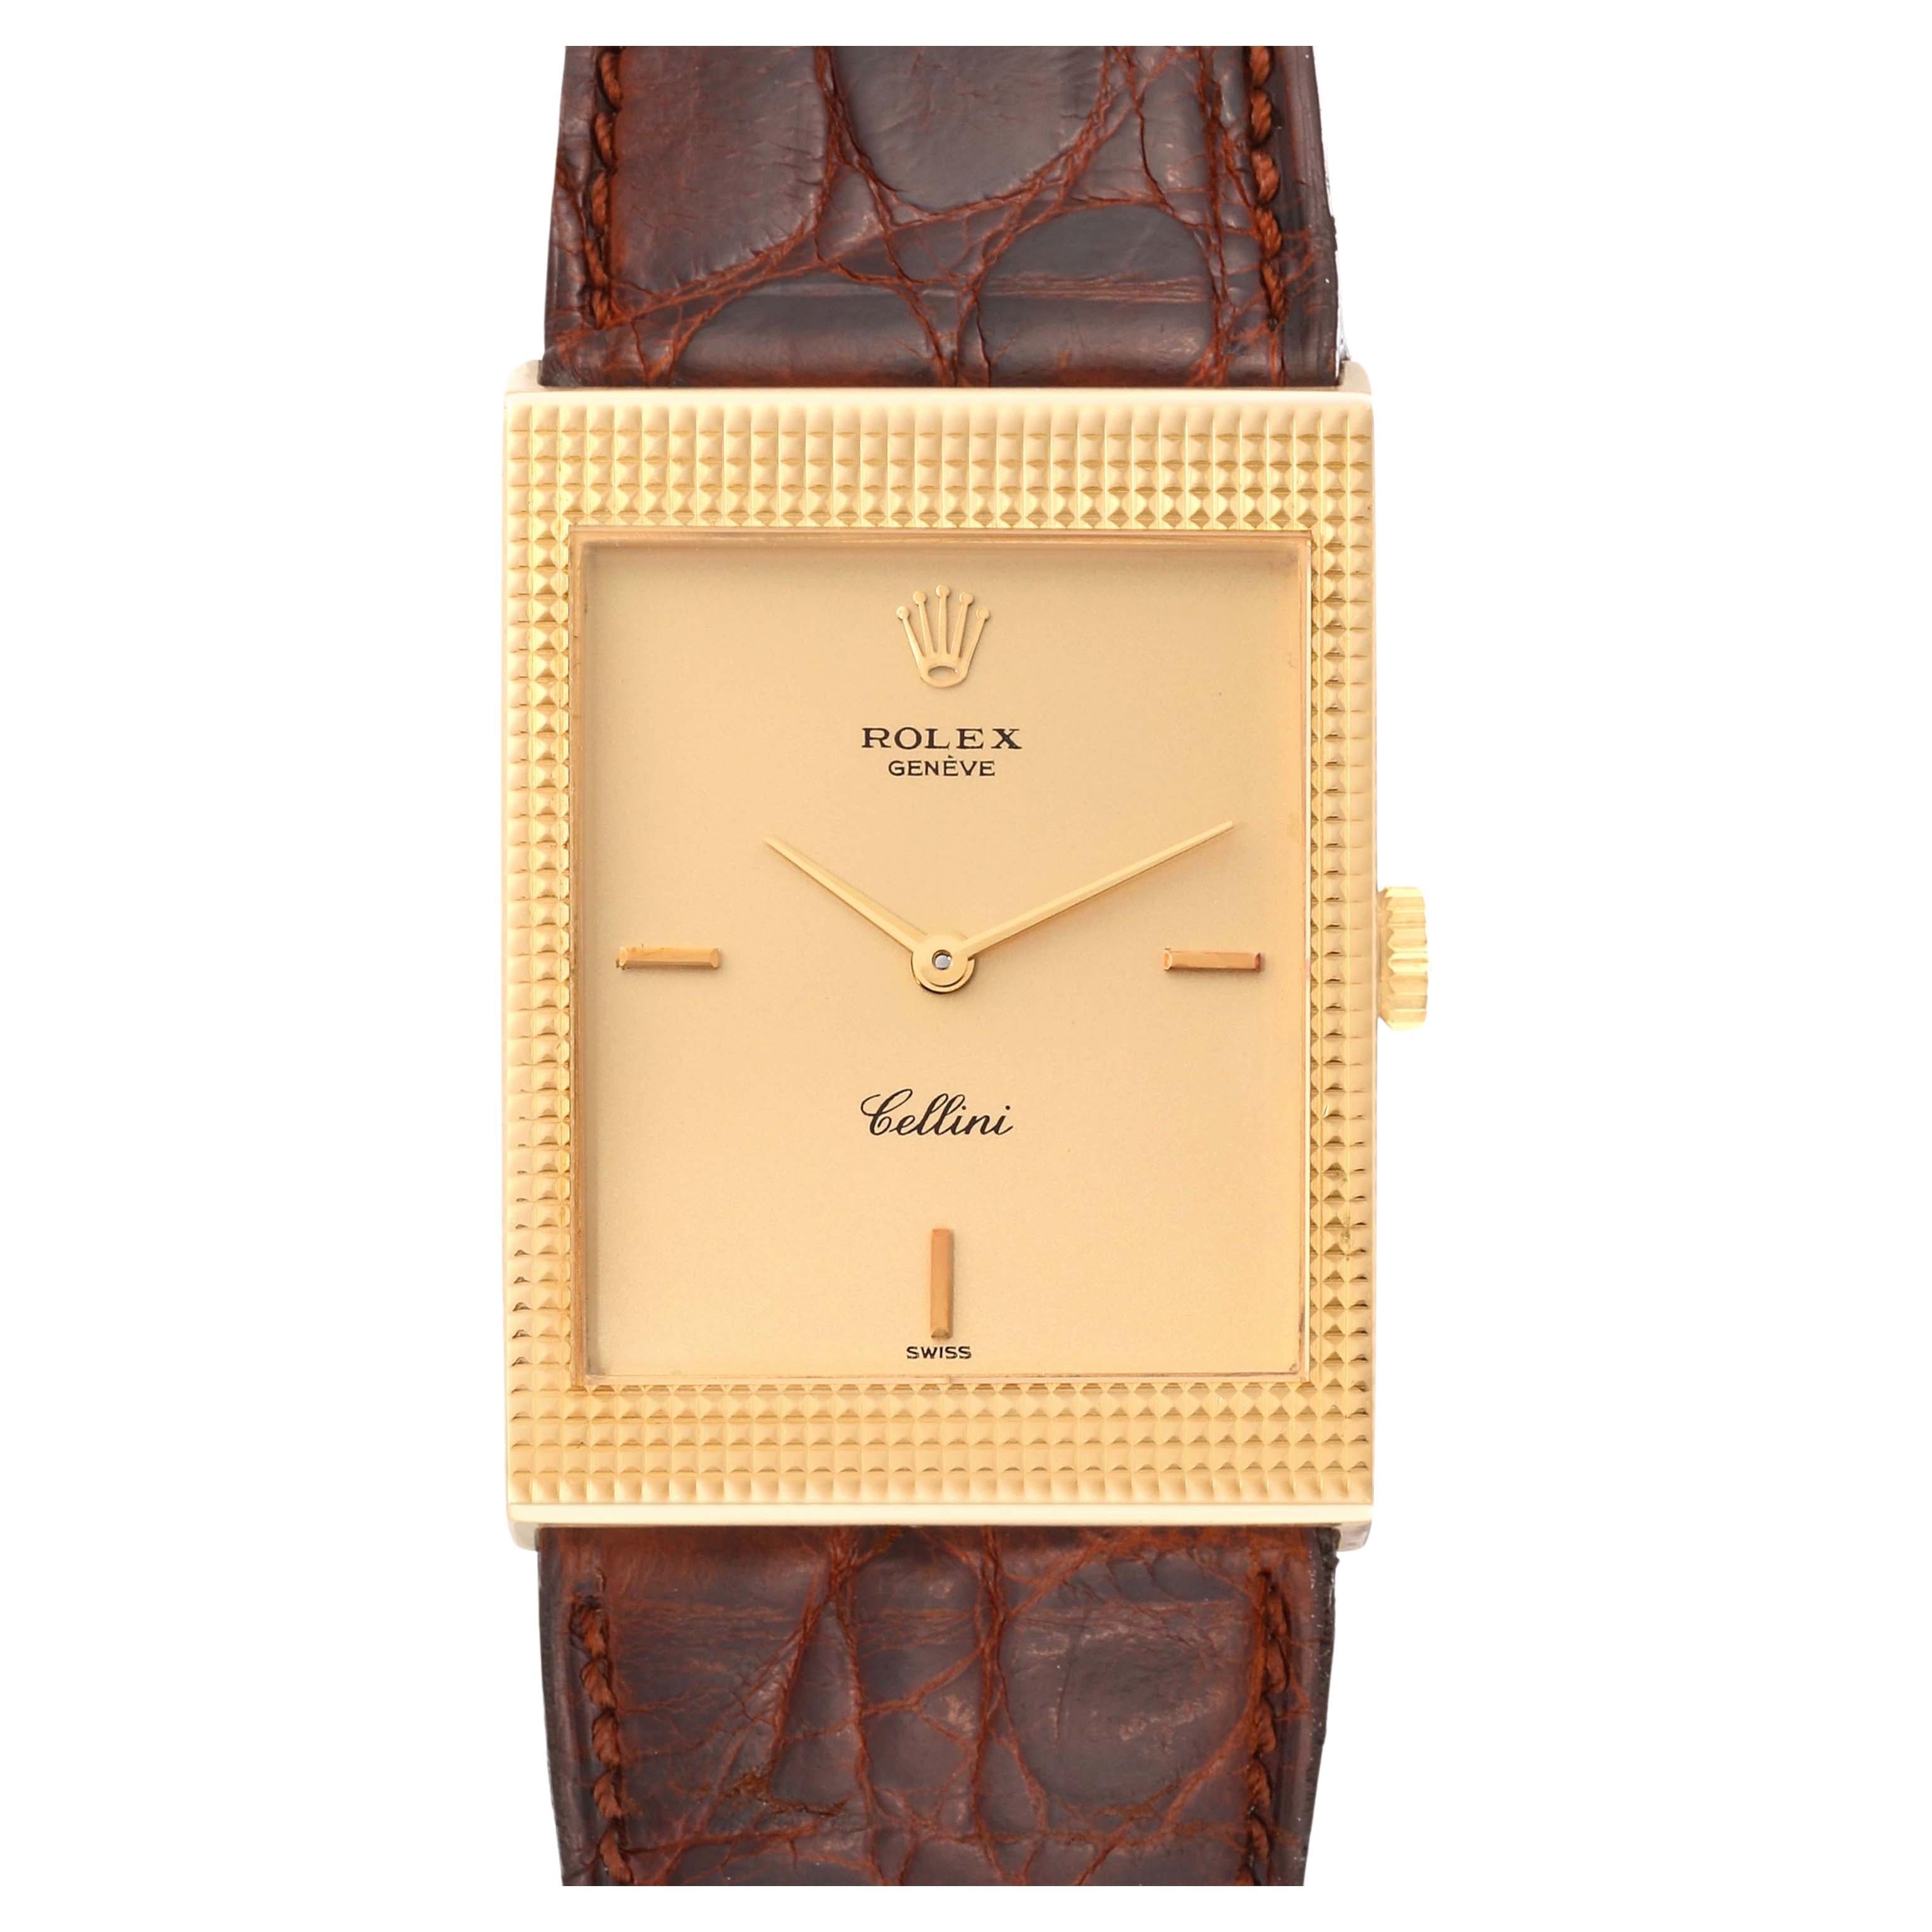 Rolex Cellini Yellow Gold Champagne Dial Vintage Mens Watch 4127